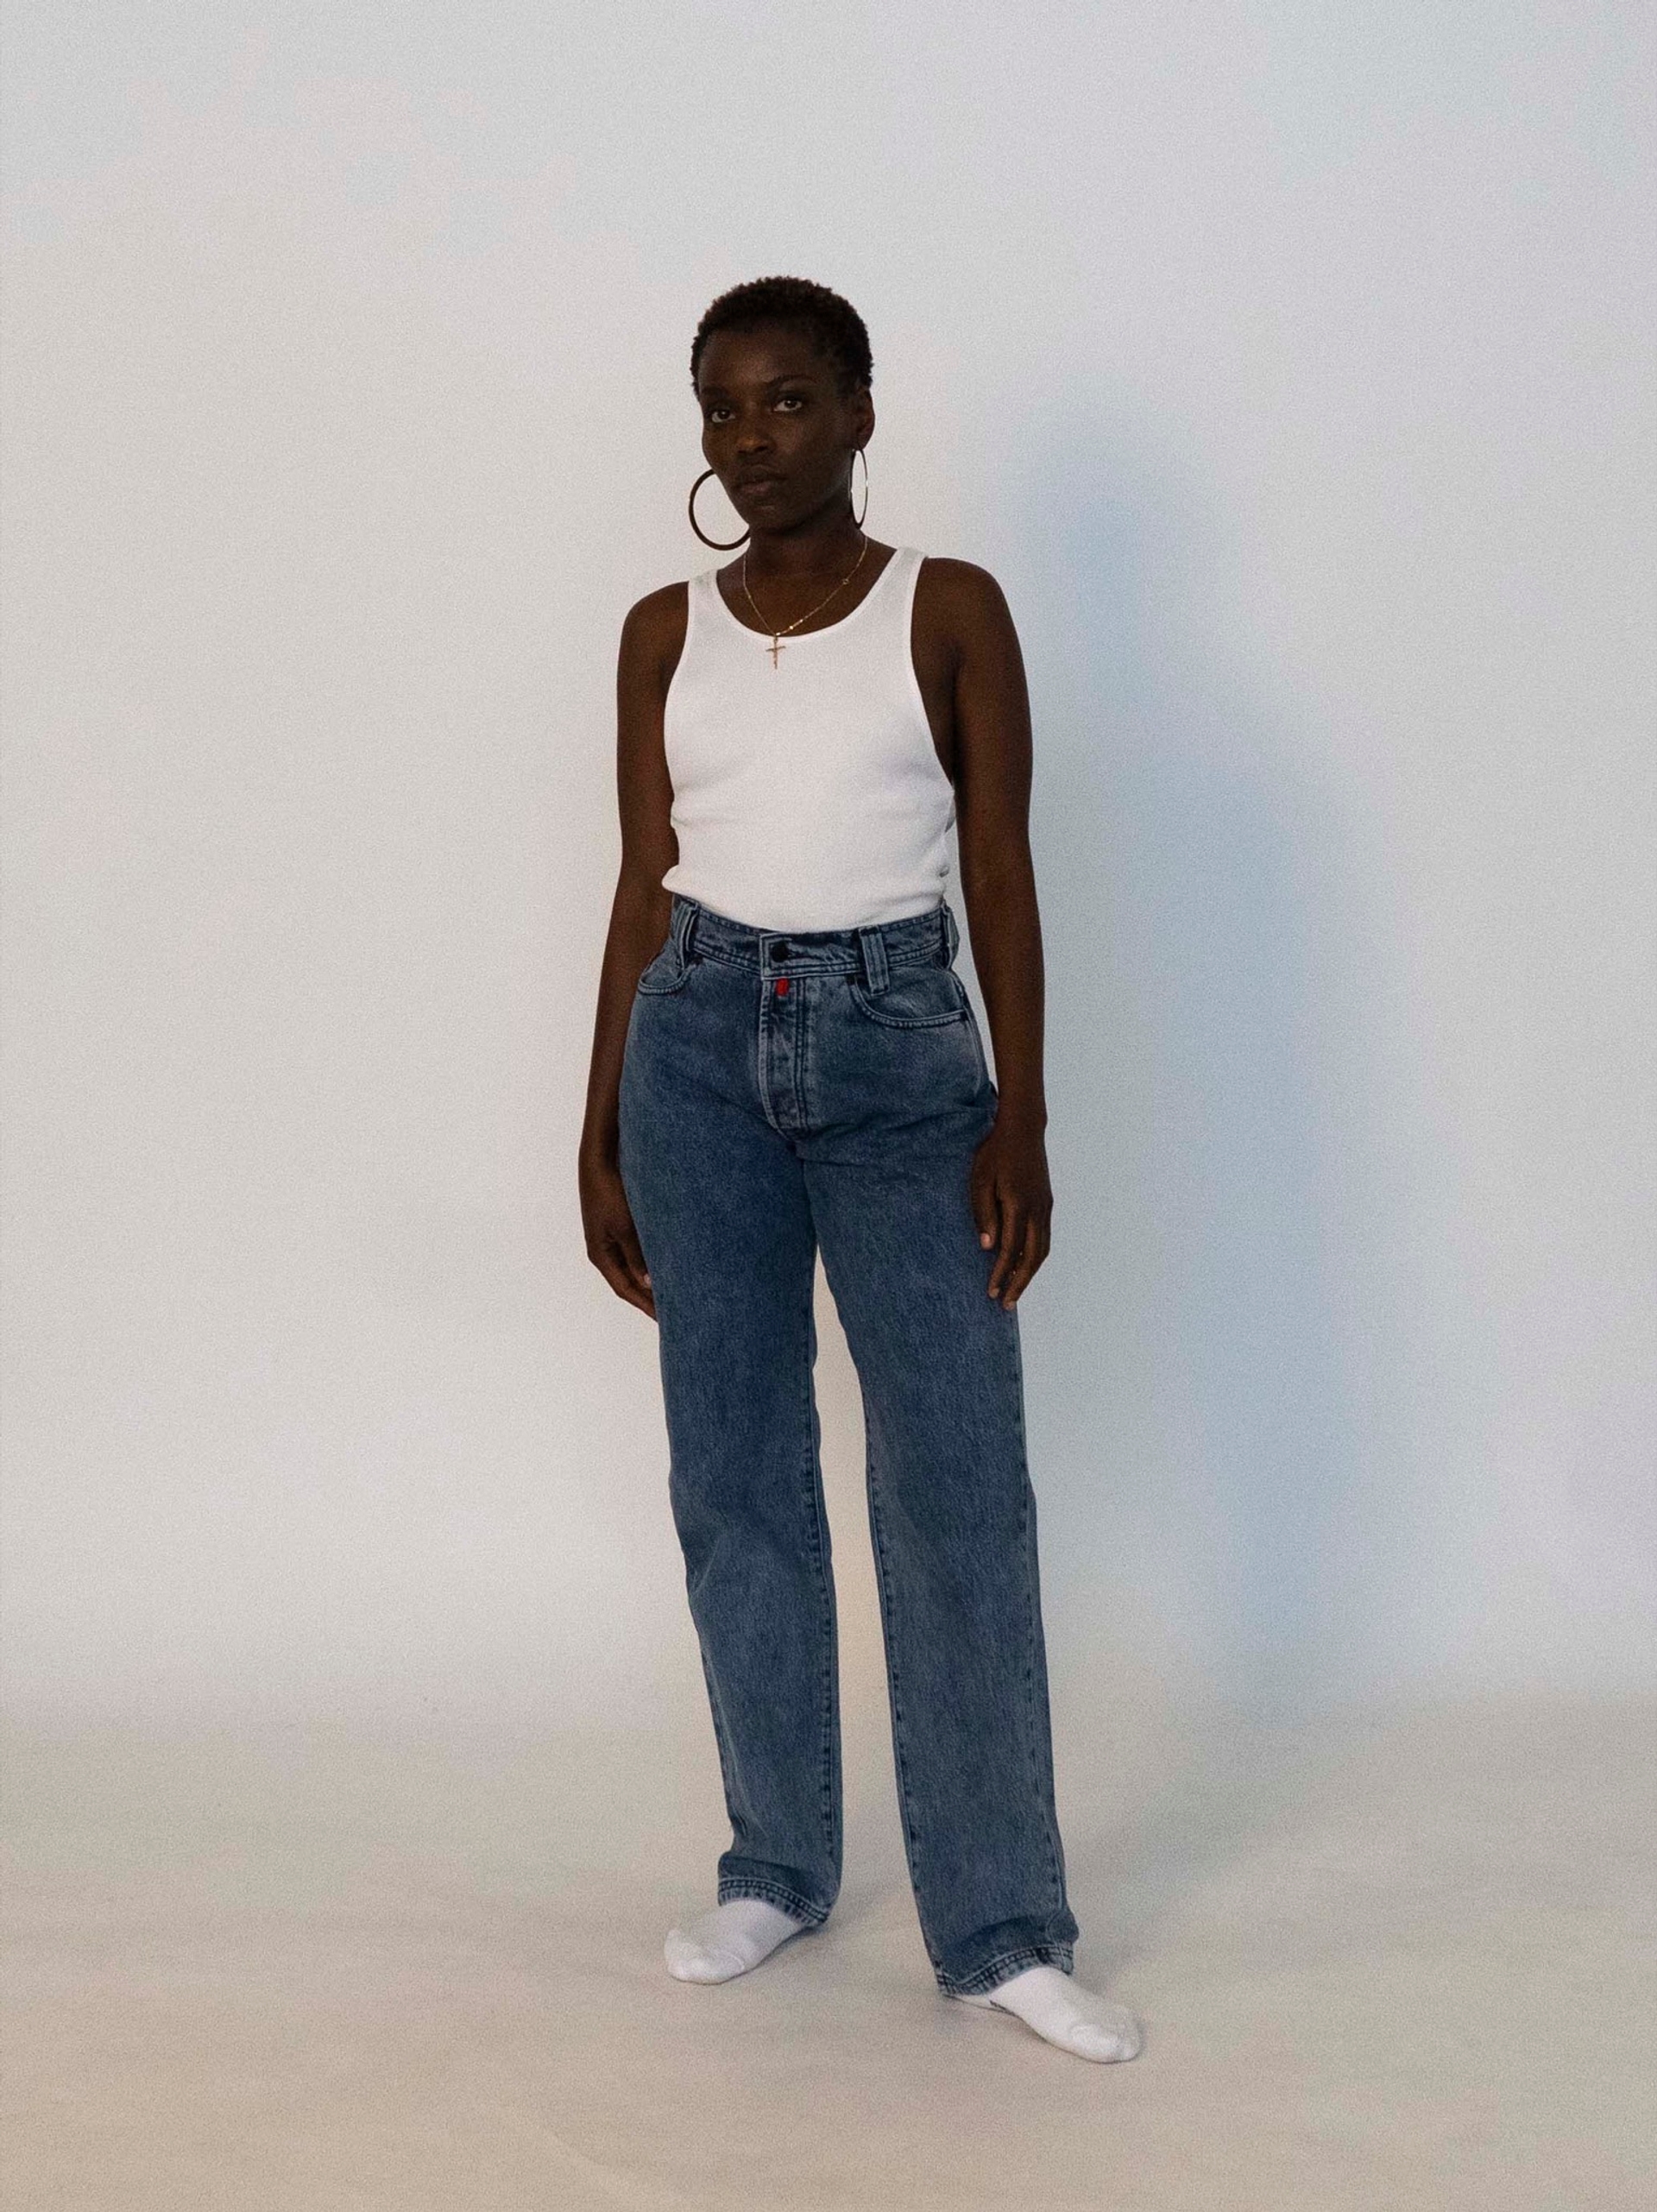 Mariama wears the 032c LoveSexDreams ribbed tank in white and the "Next" jeans in light blue